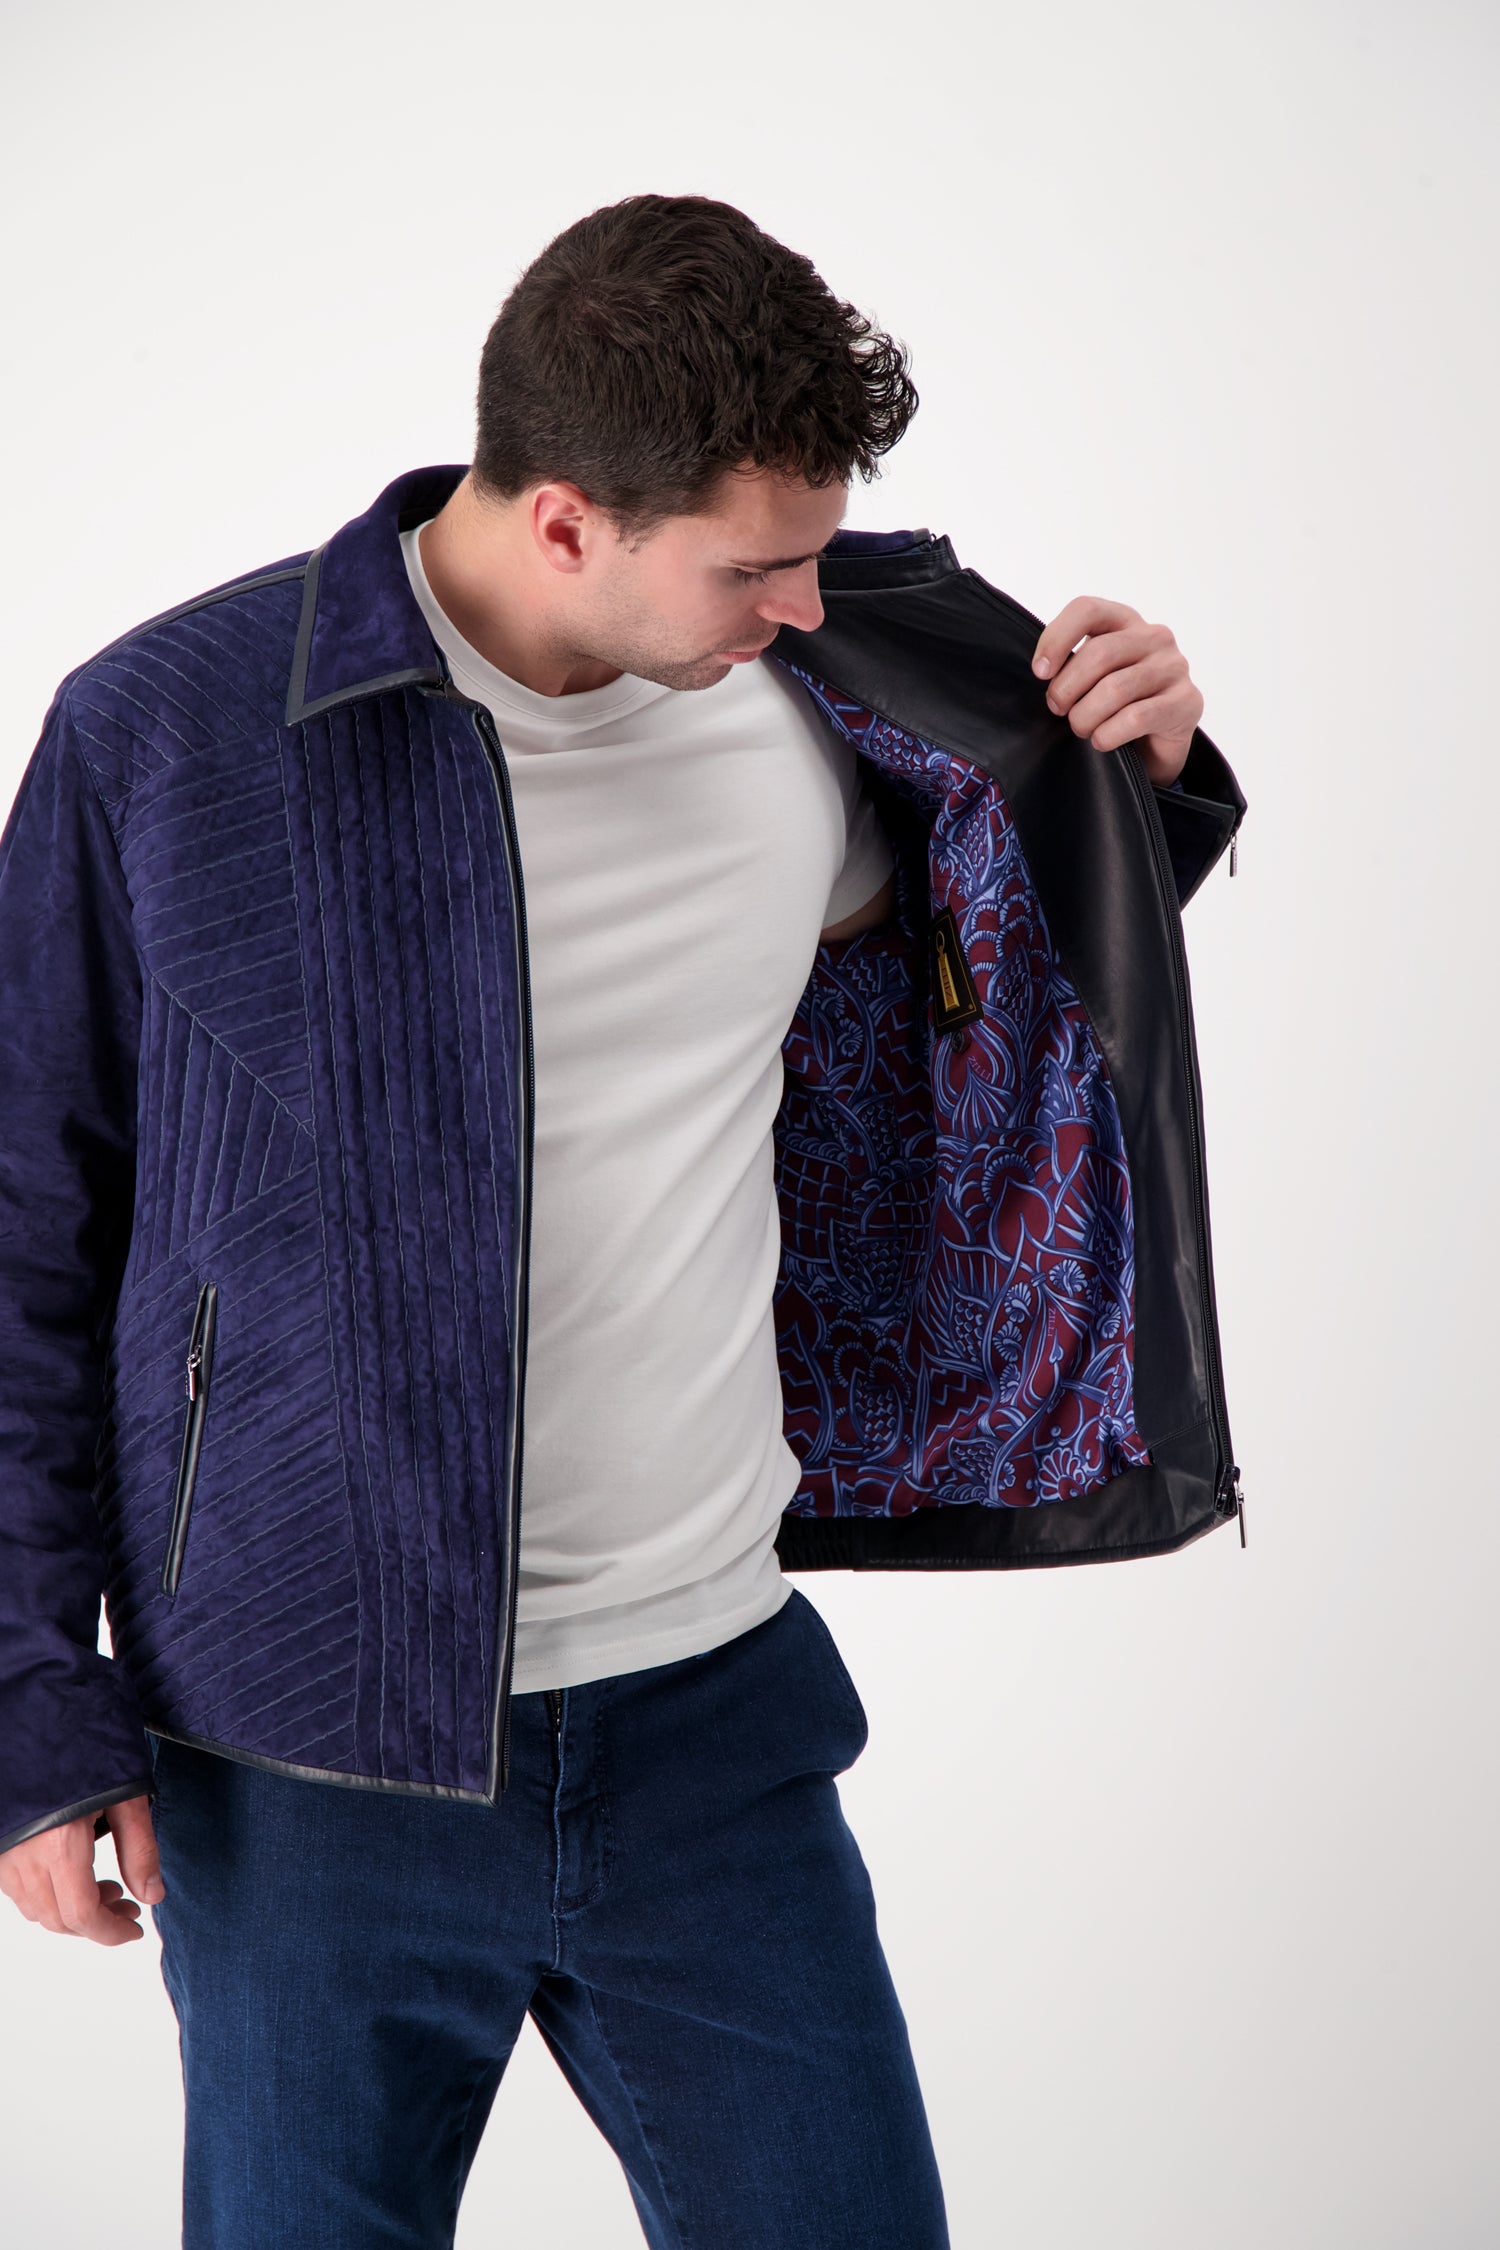 Shop Branded Luxury Men's Jackets From Top Designers